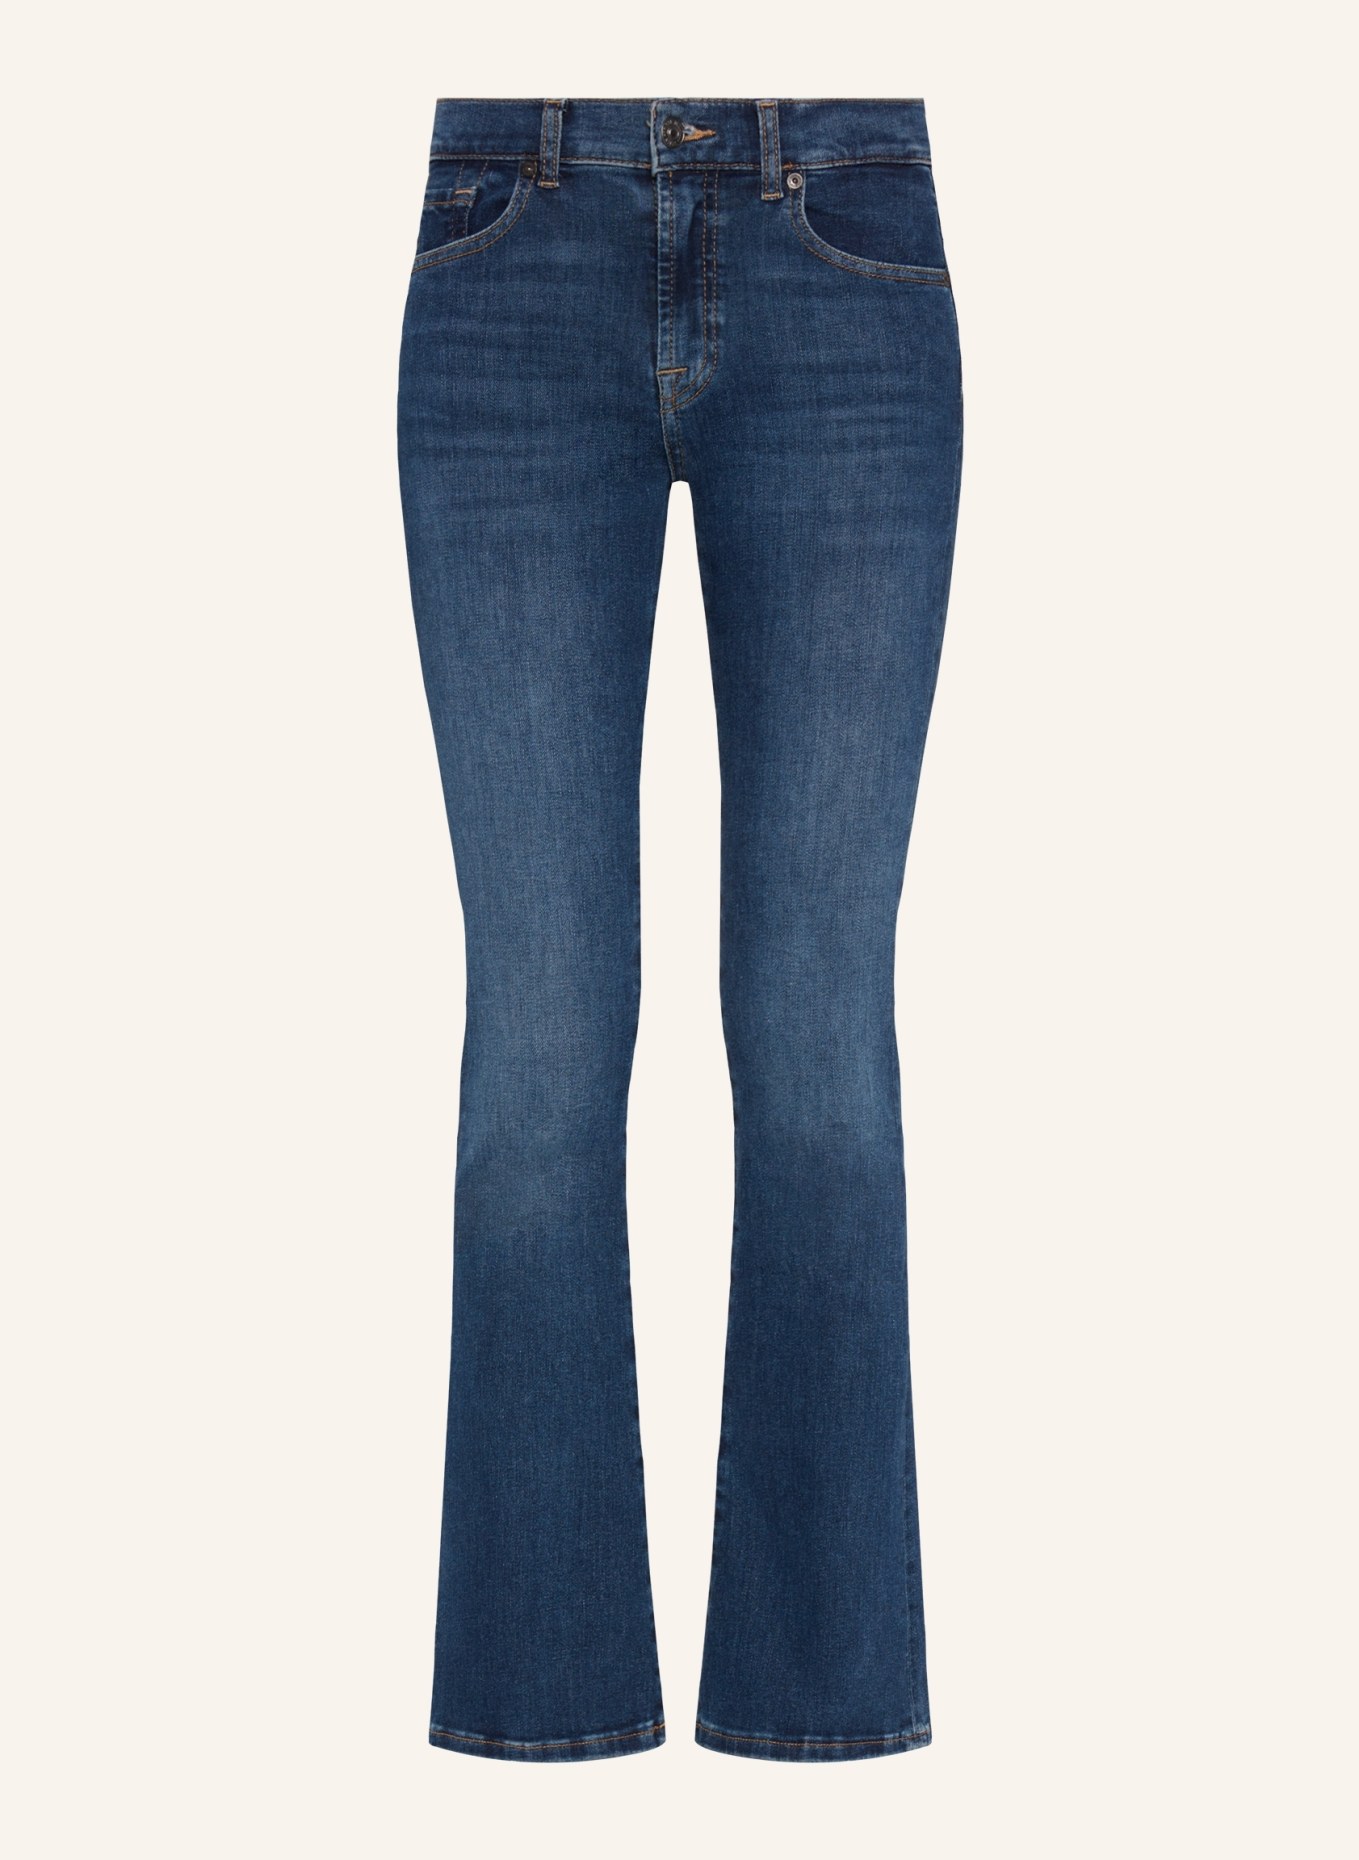 7 for all mankind Jeans BOOTCUT TAILORLESS Bootcut Fit, Farbe: BLAU (Bild 1)